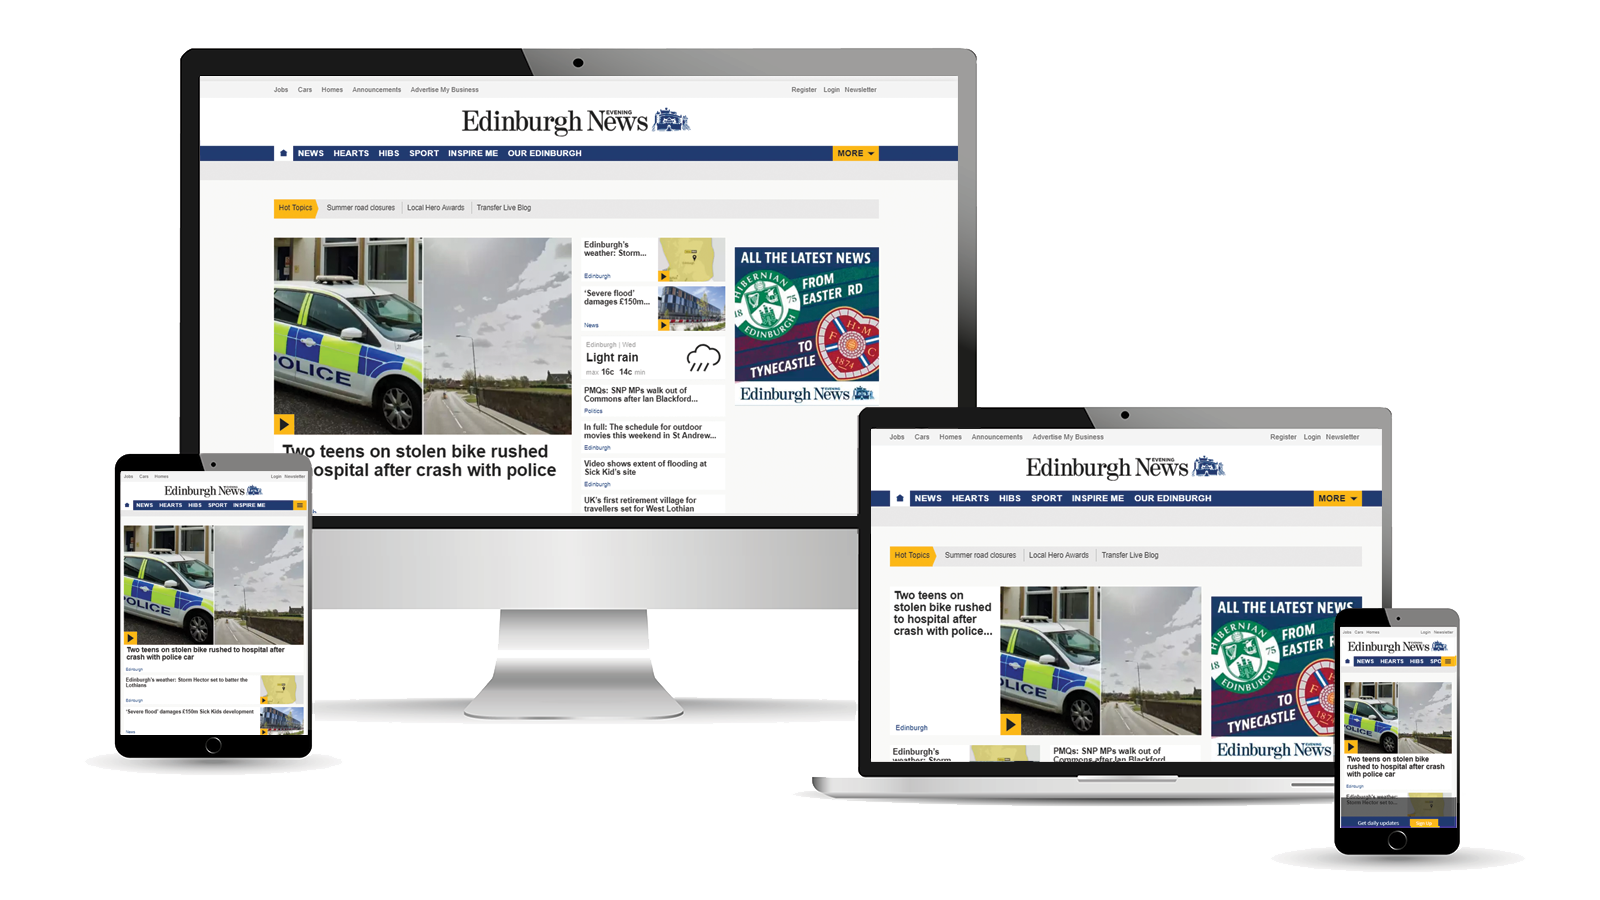 Advertise across desktop, tablet and mobile with The Edinburgh Evening News